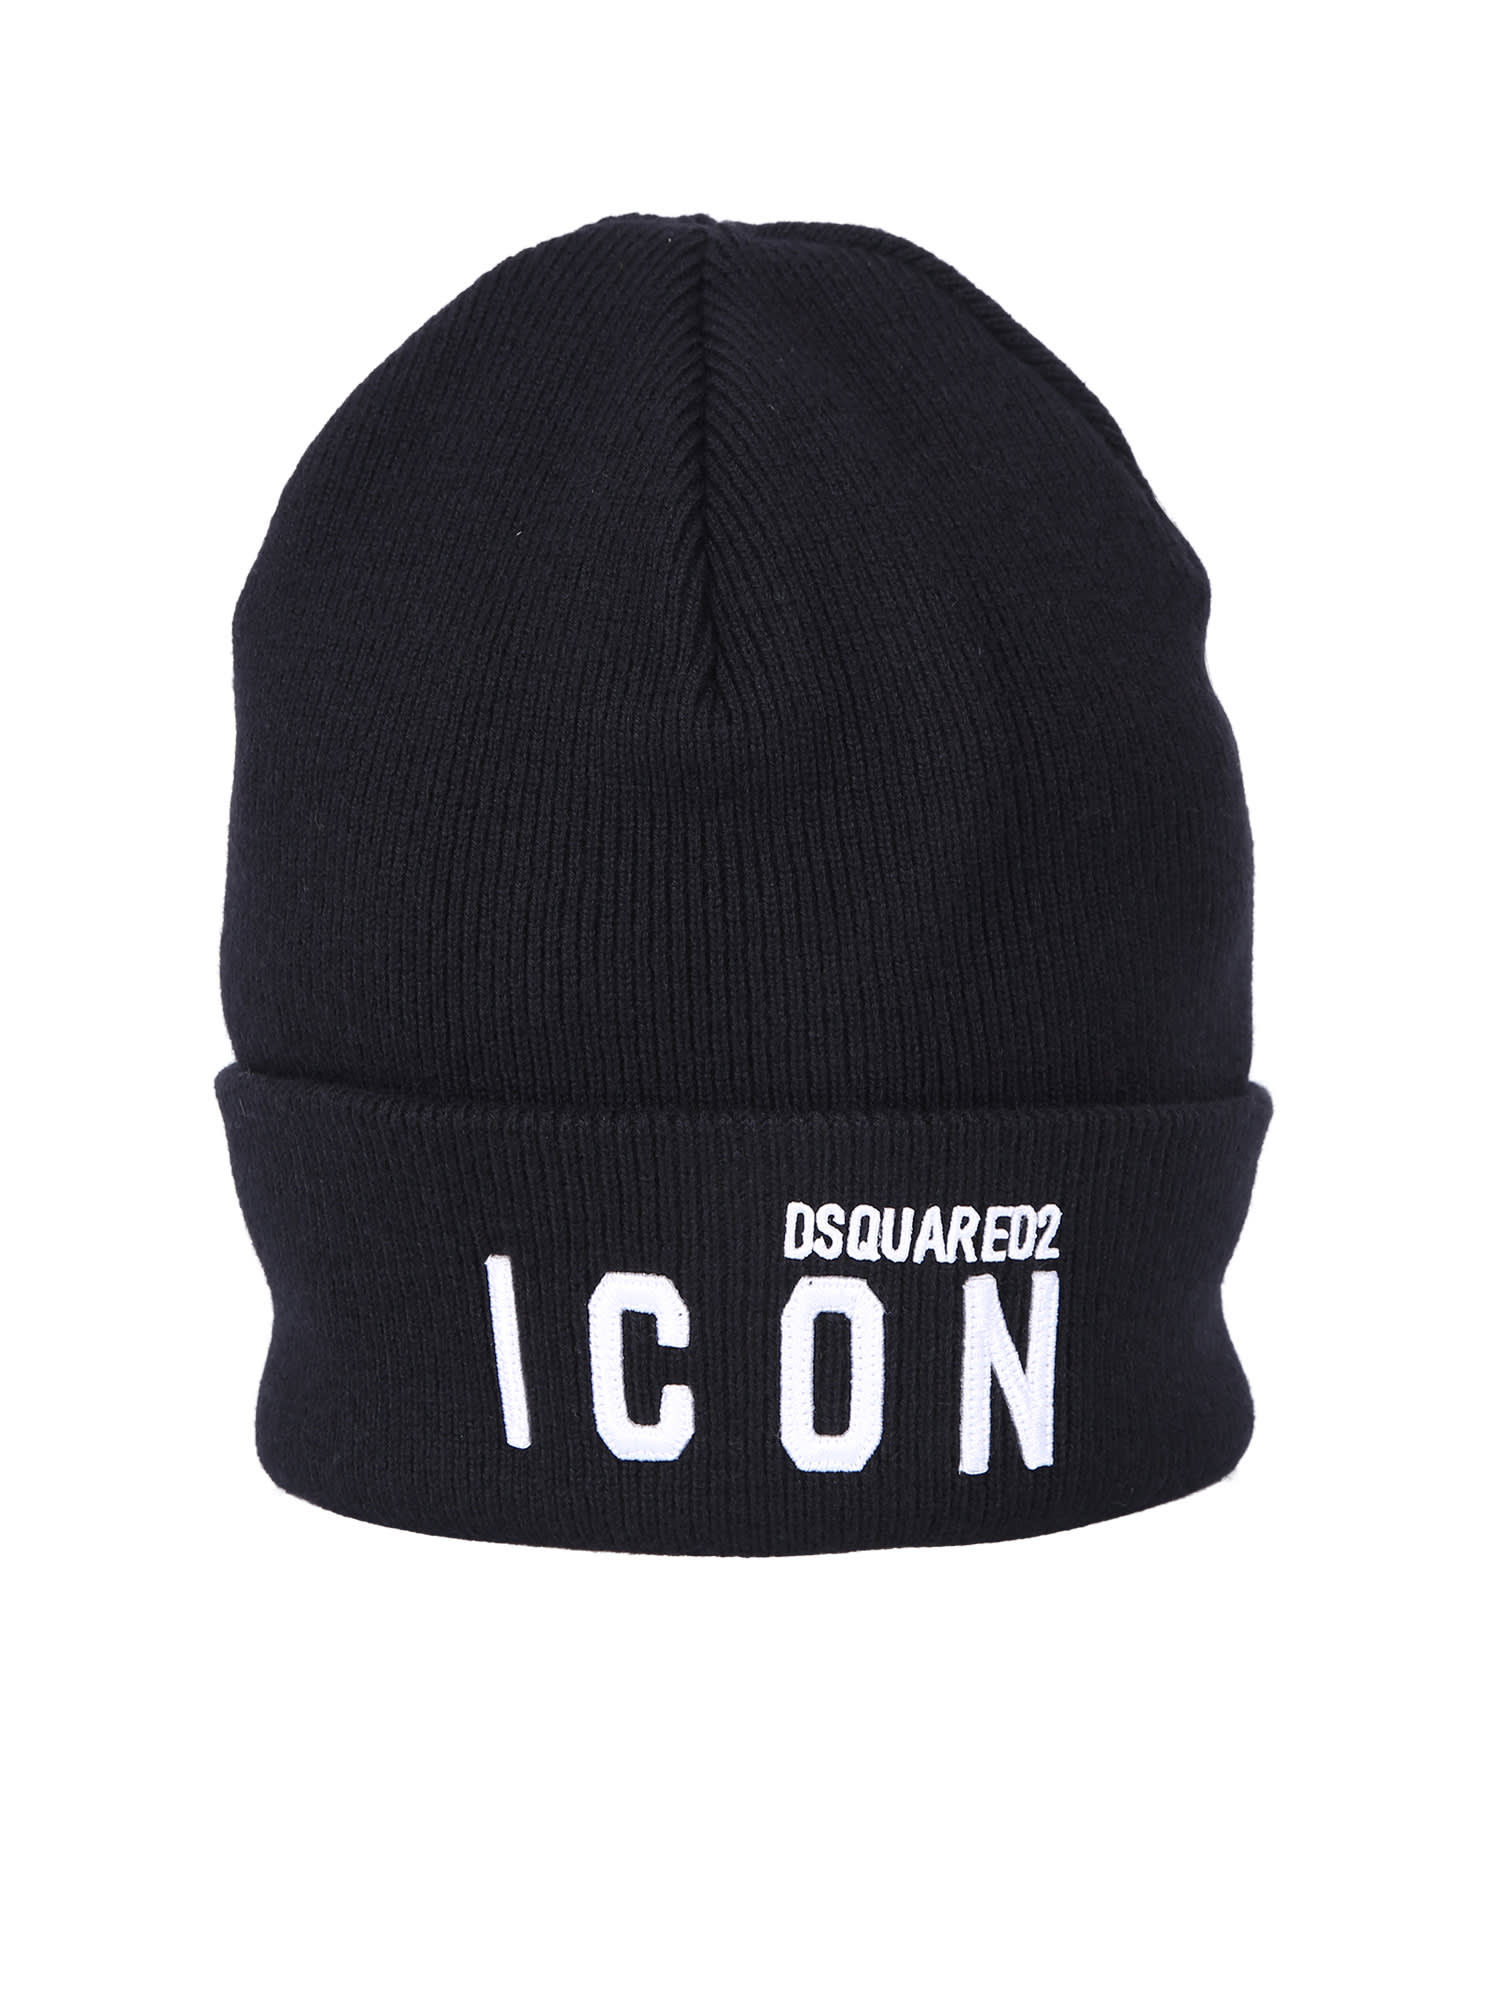 Dsquared2 Branded Beanie Hat